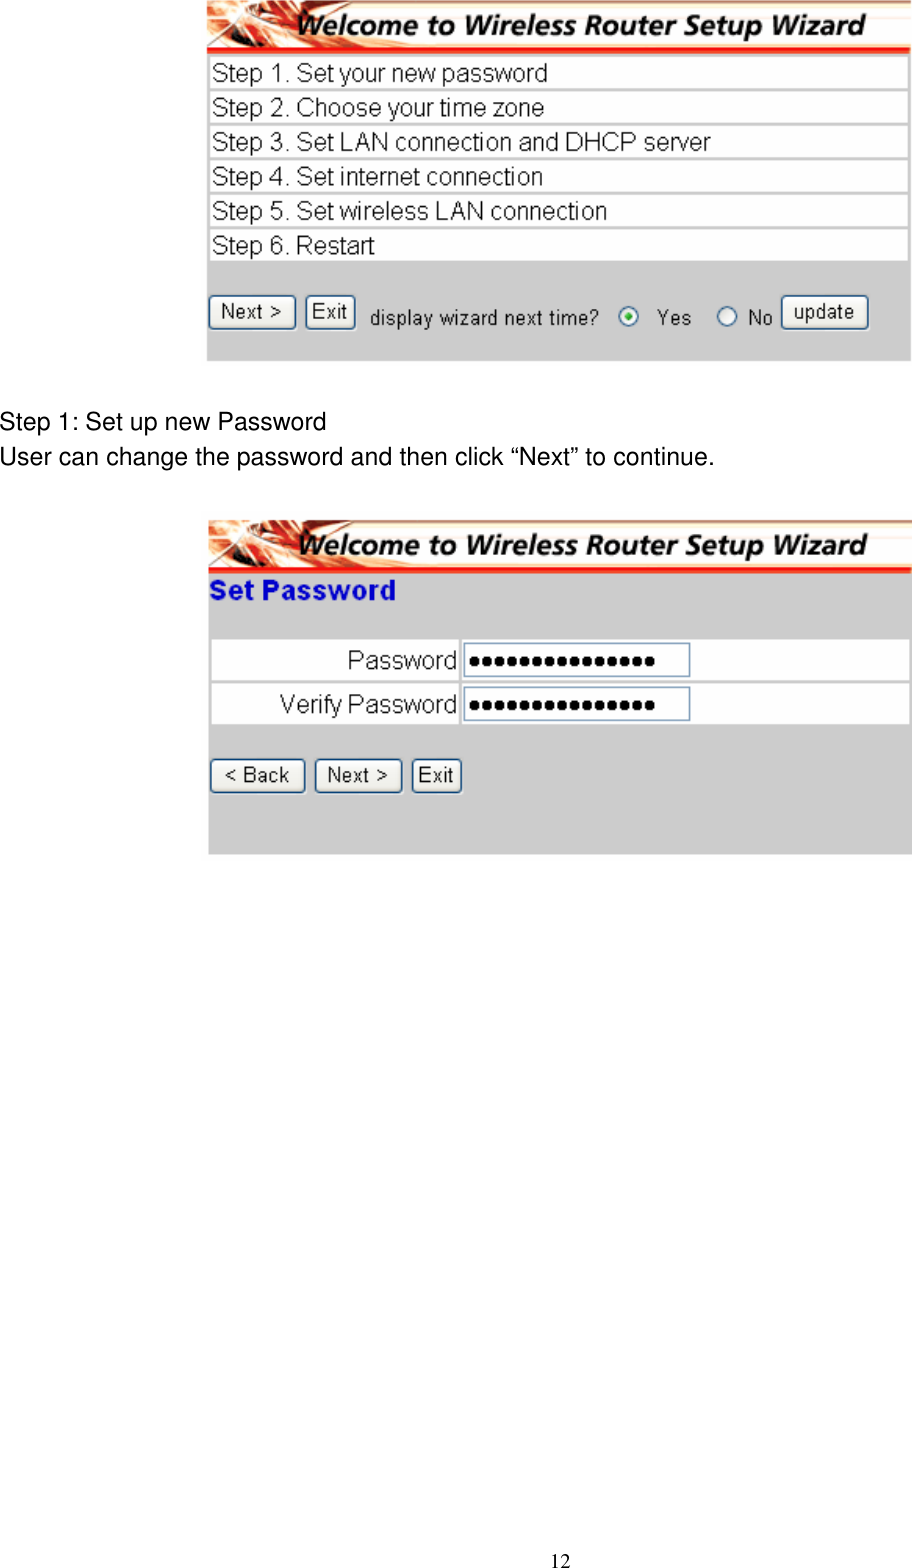  12  Step 1: Set up new Password User can change the password and then click “Next” to continue.   